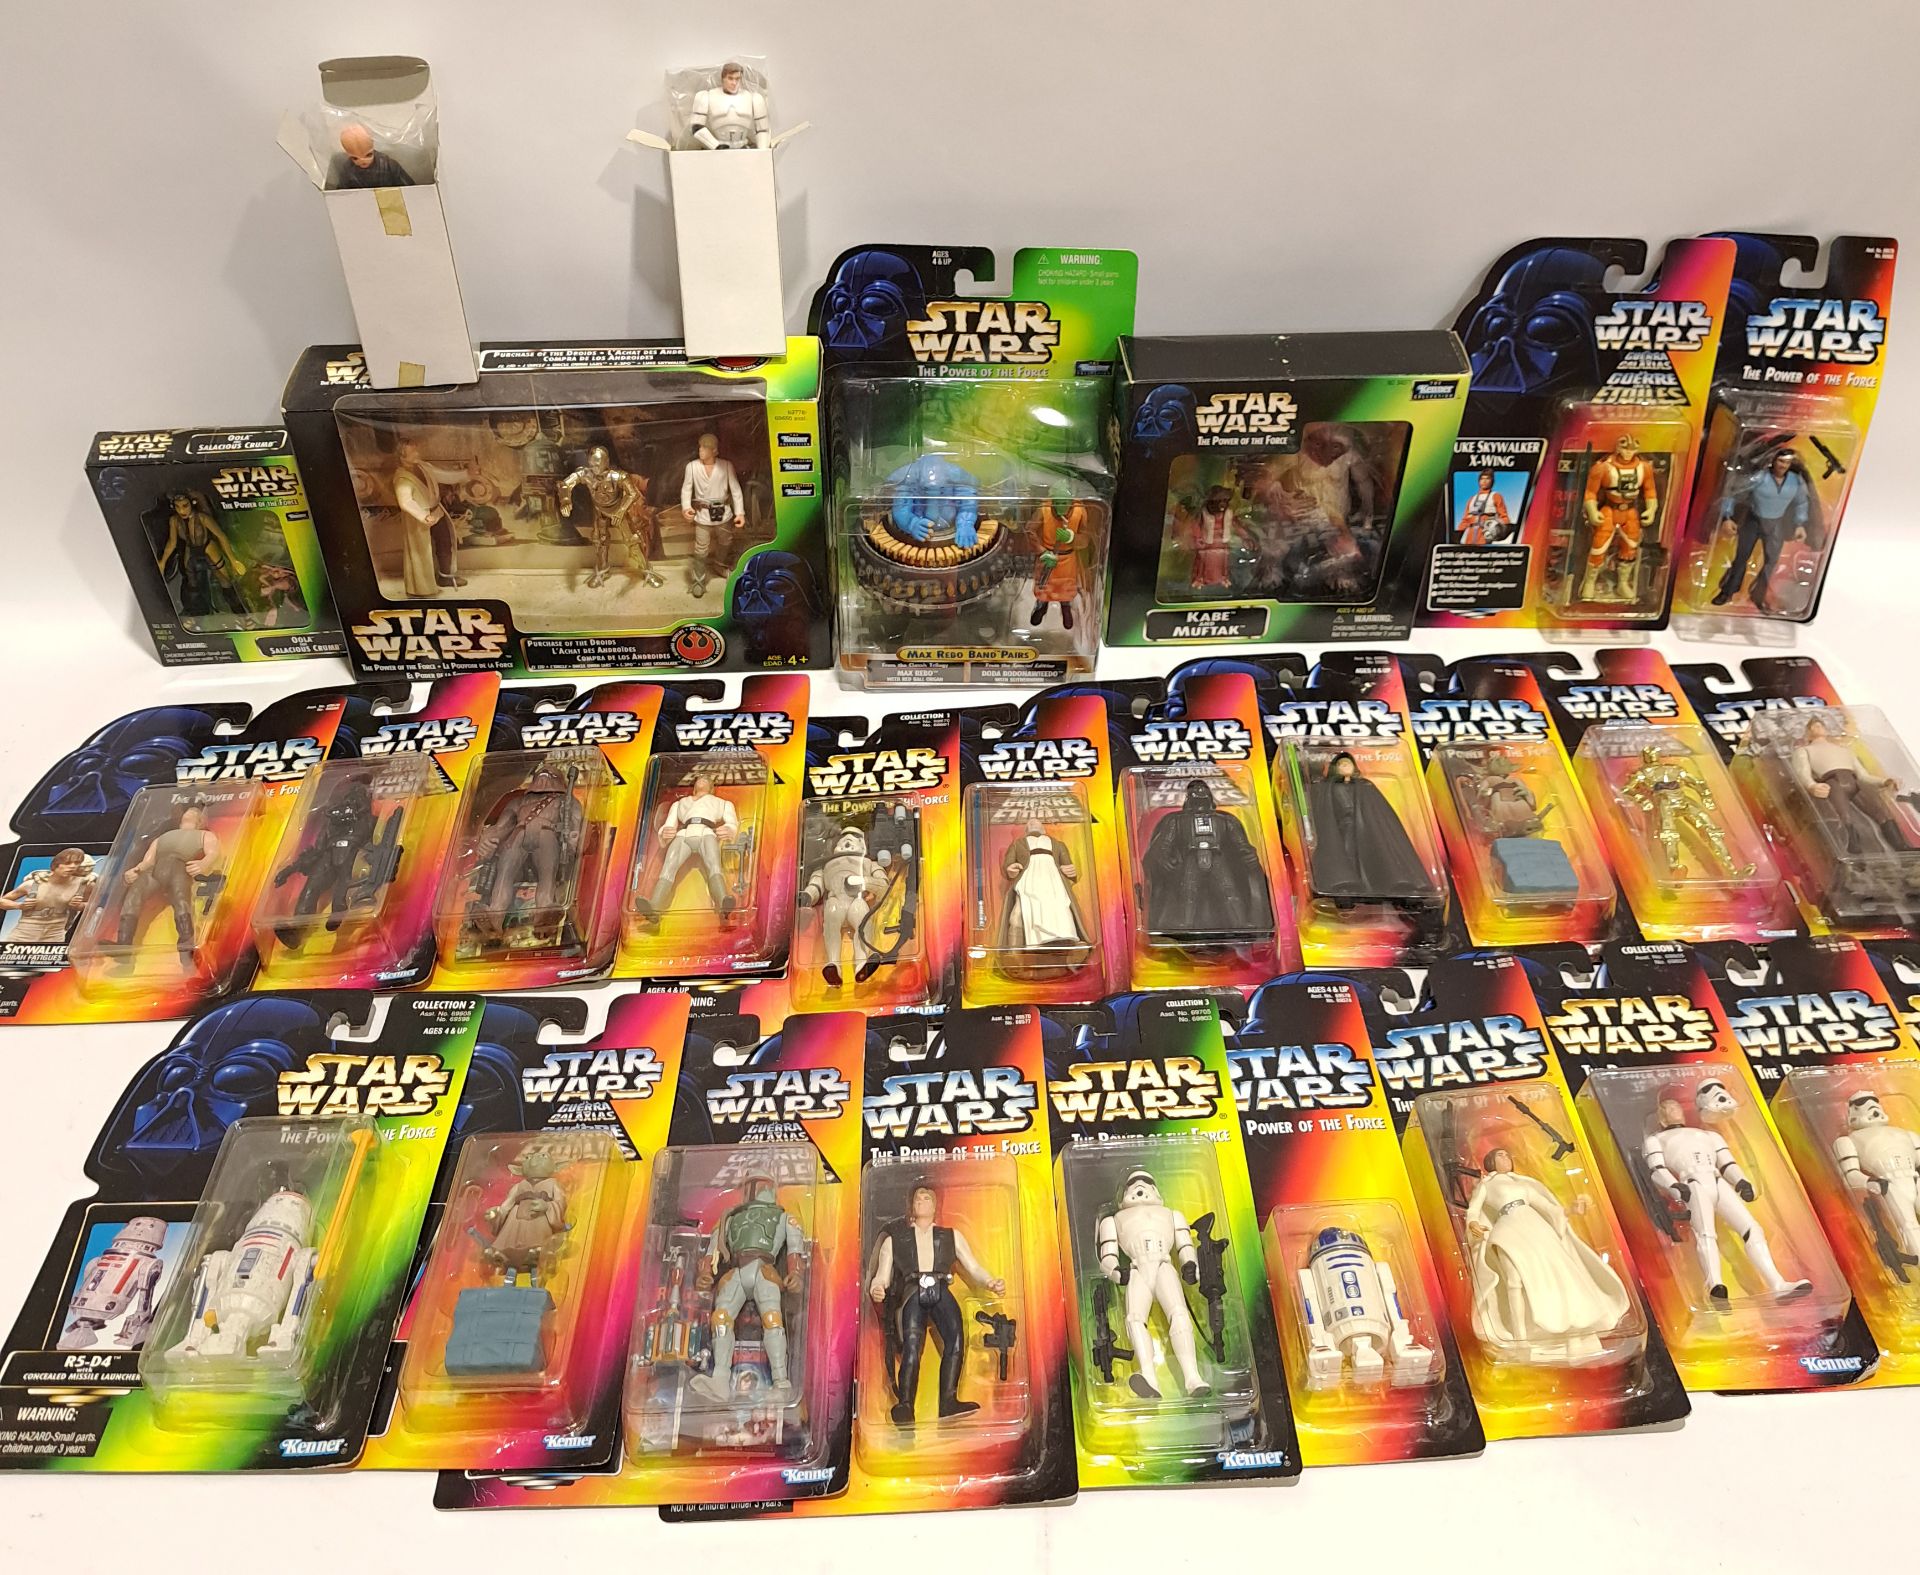 Quantity of Star Wars Power of the Force 3 3/4" Action Figures